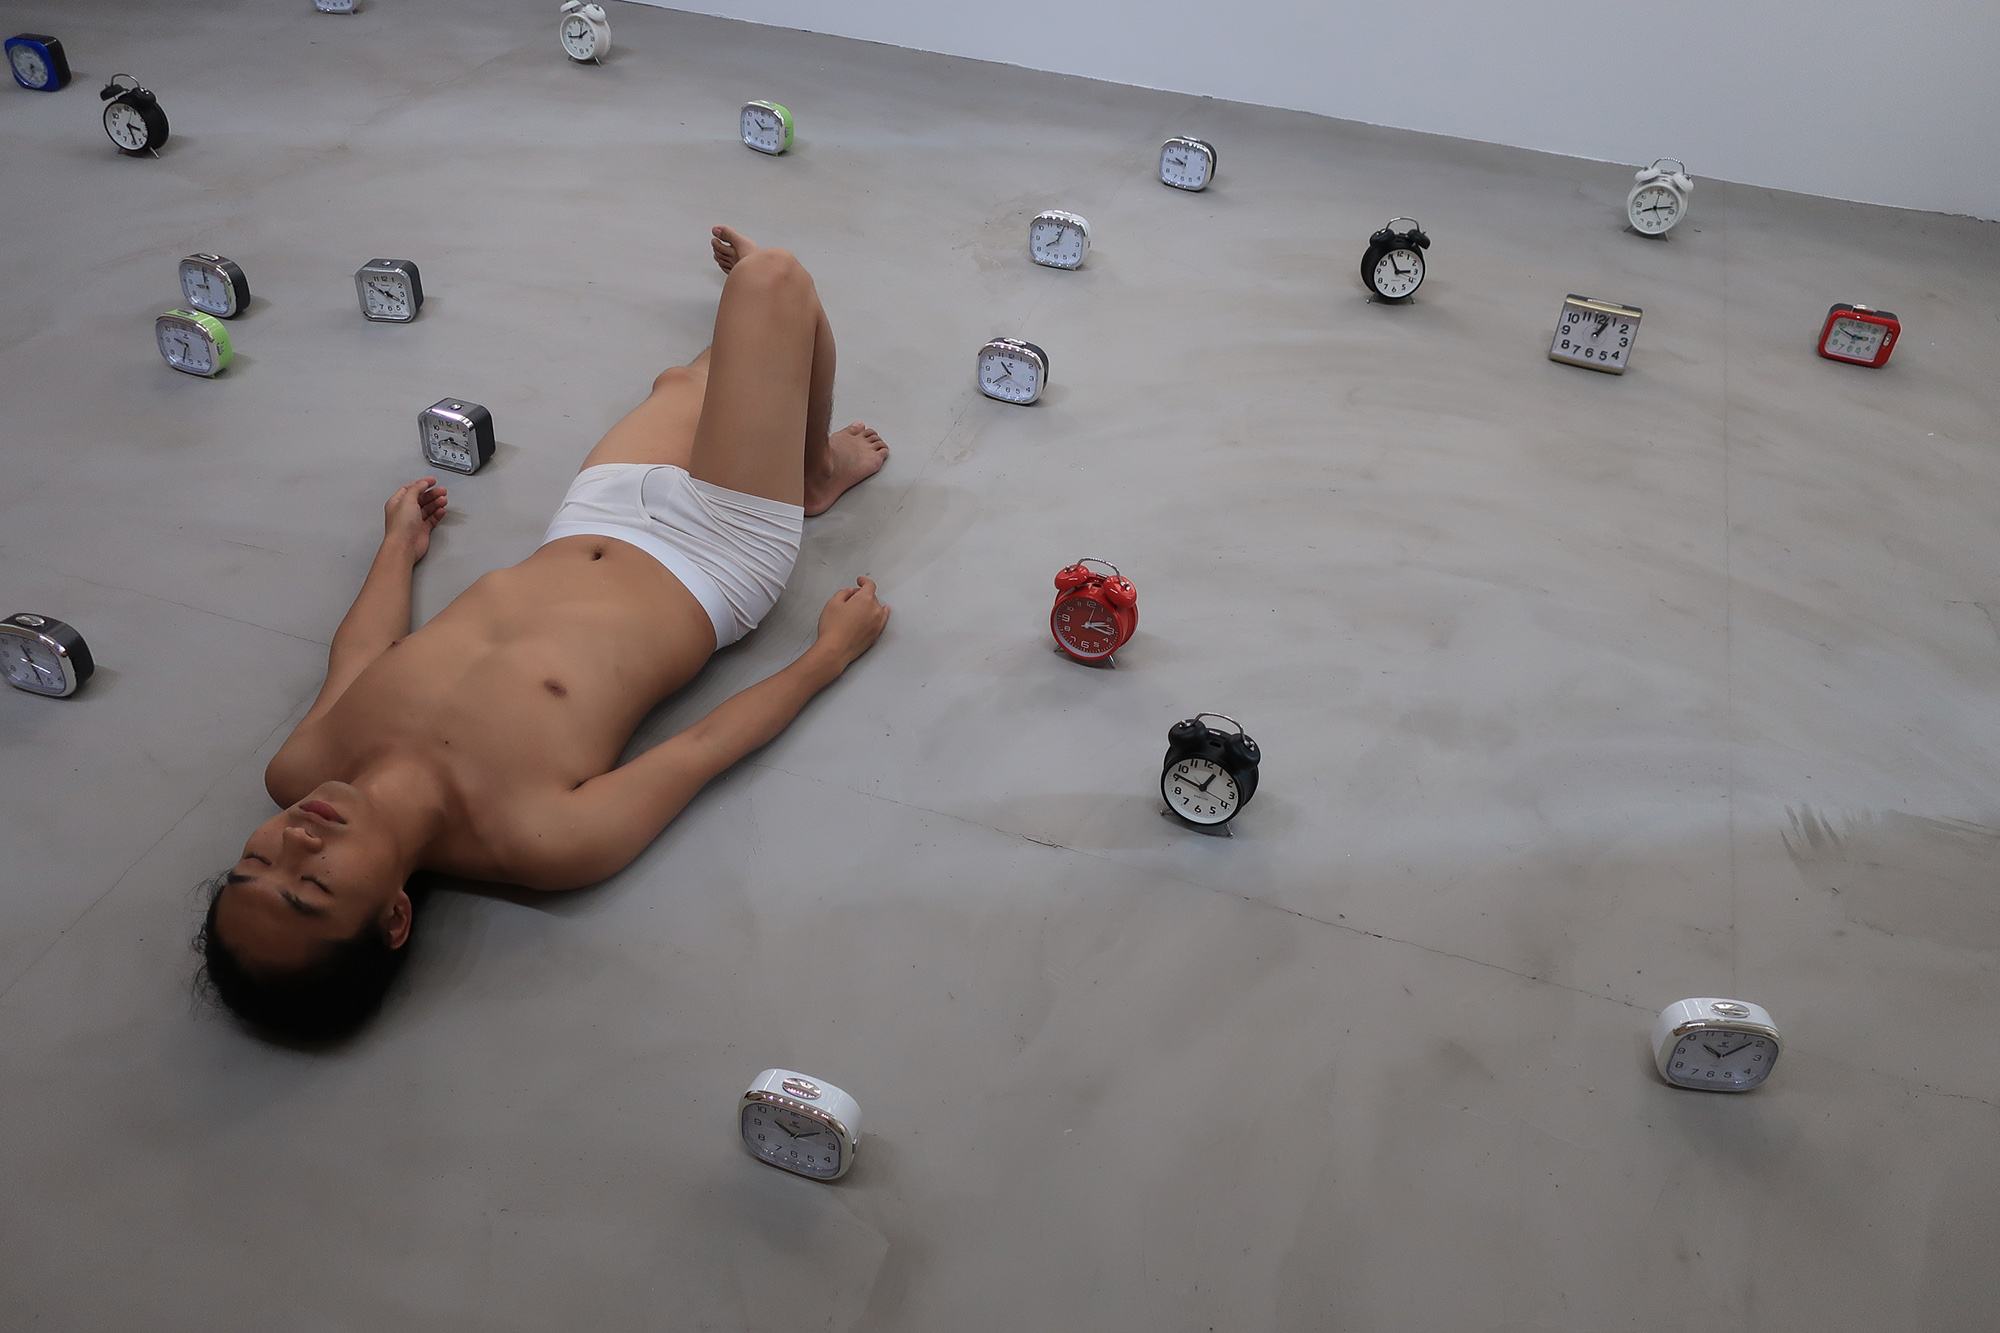 The artist, a young Taiwanese man, reclines in his underwear in a gallery of alarm clocks.